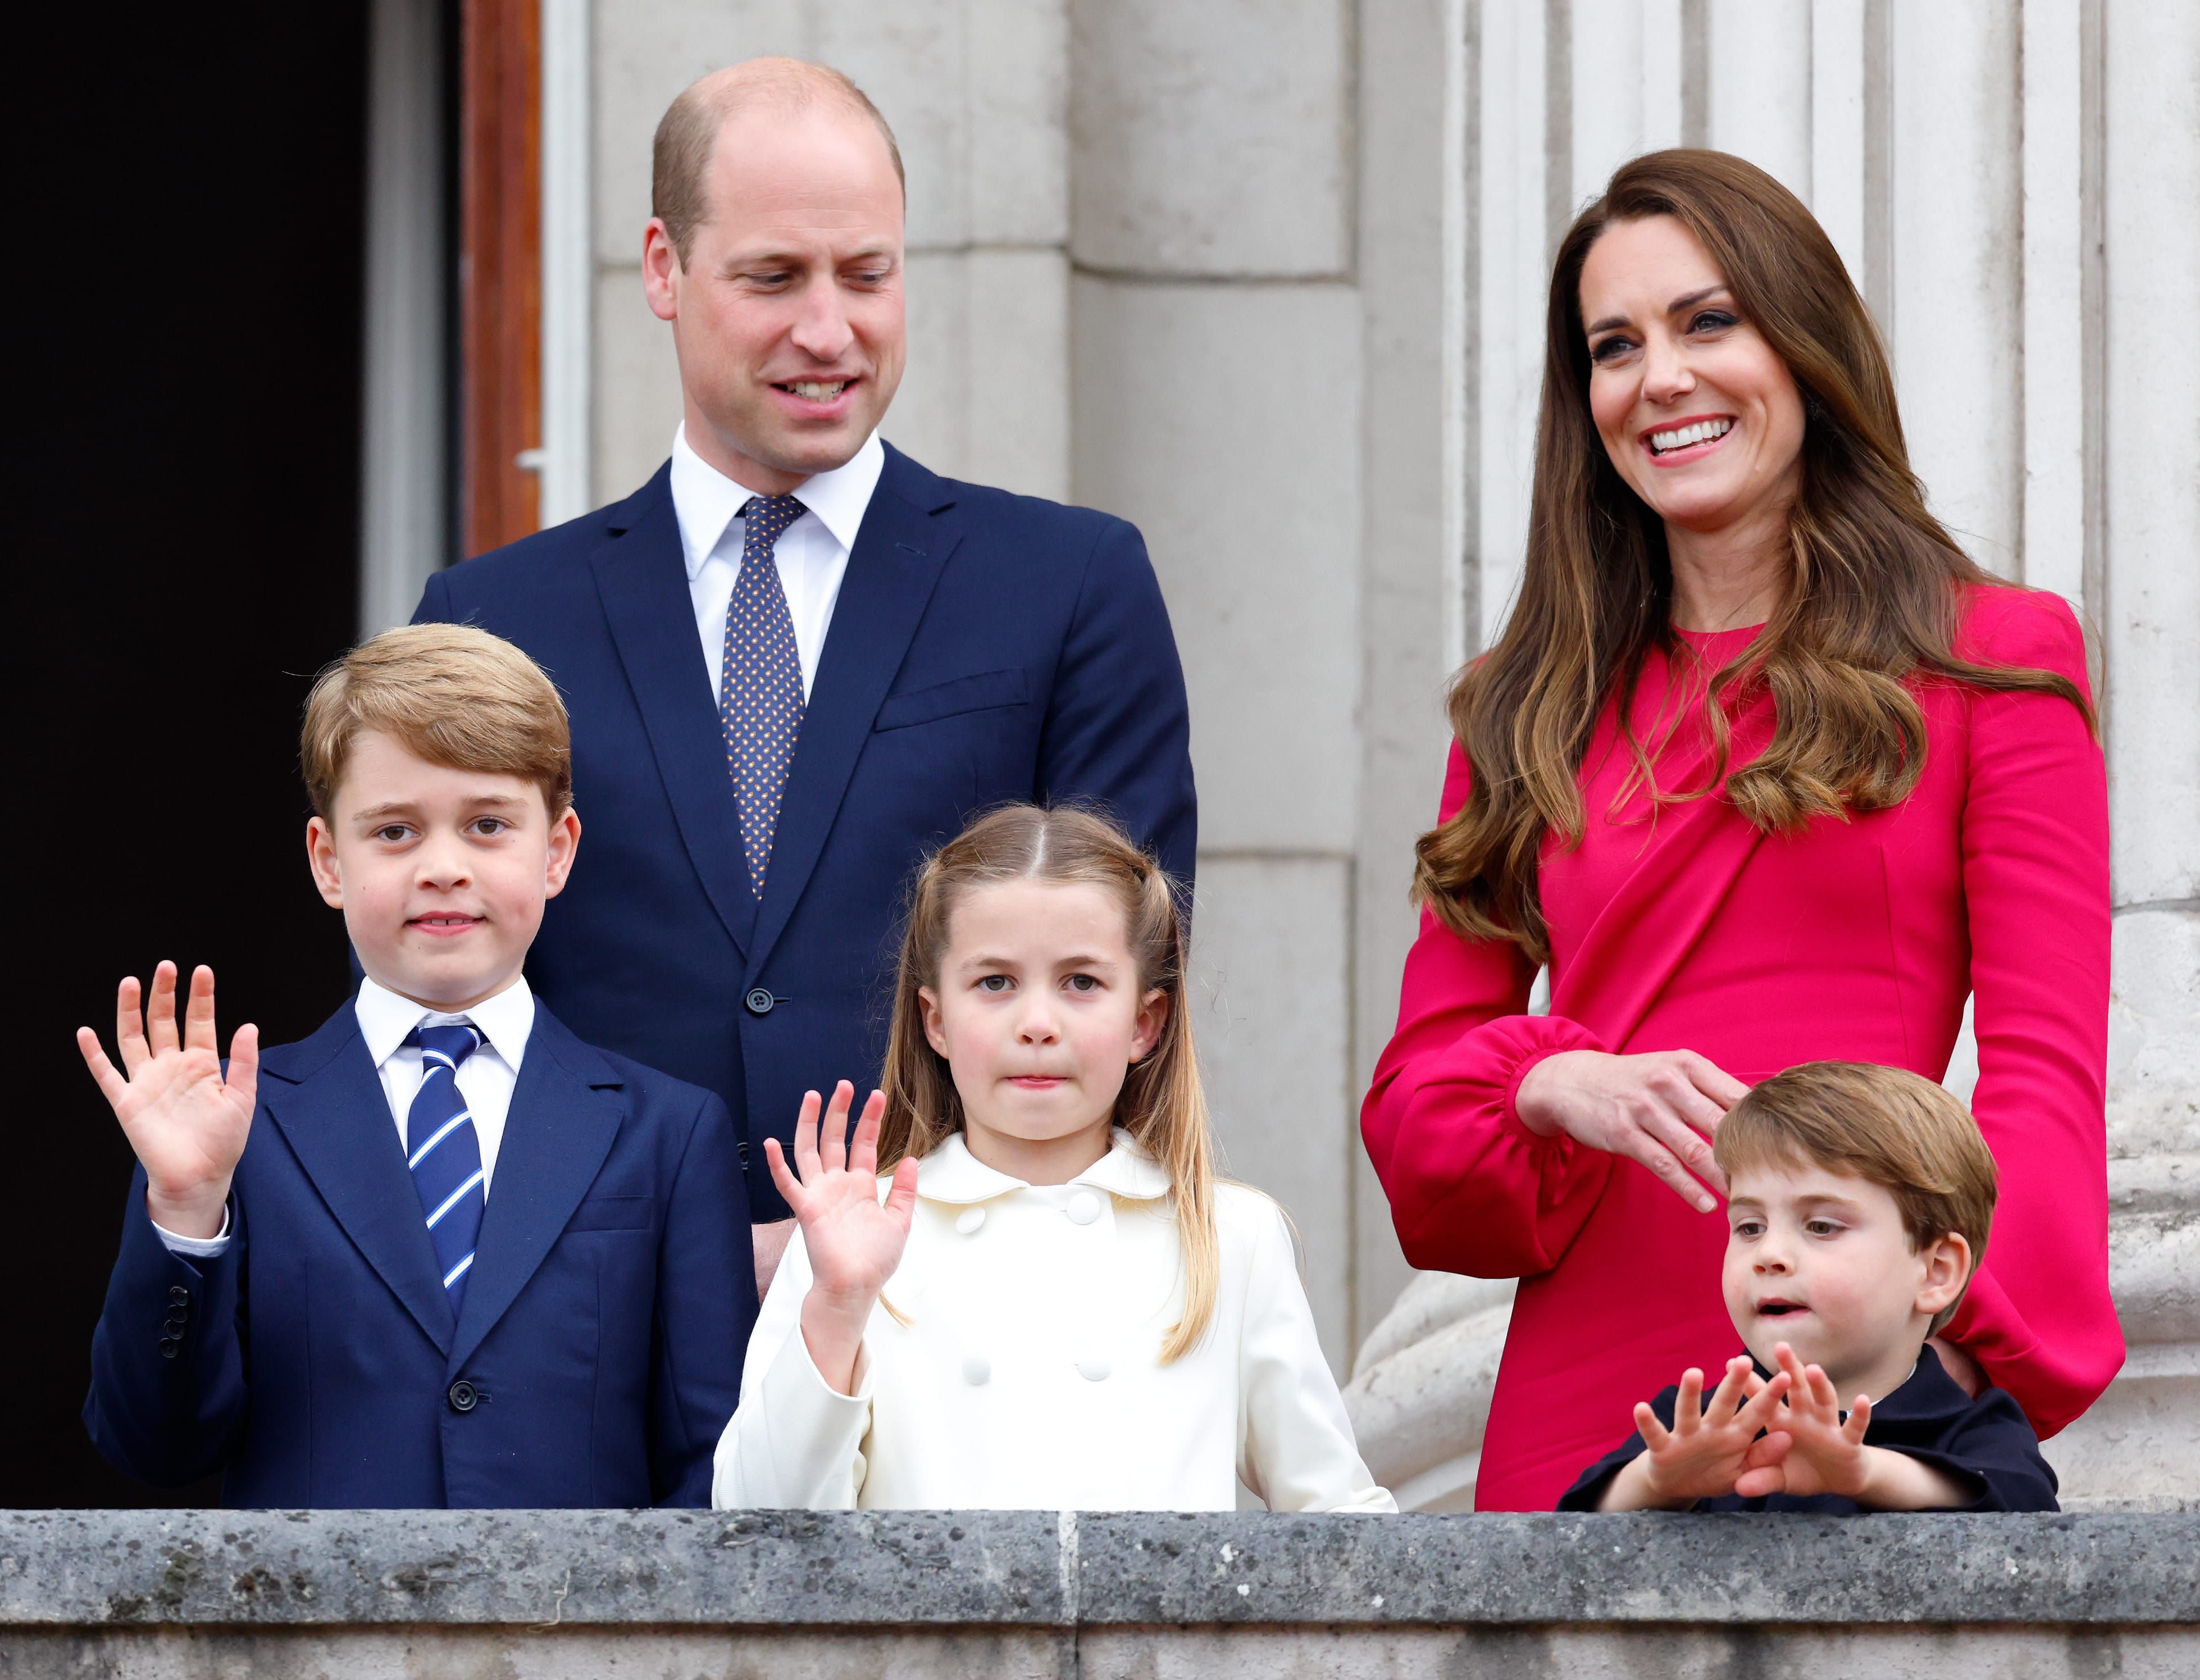 Kate Middleton Shares Her Children's Reaction To Her And Prince William's Engagement Photos